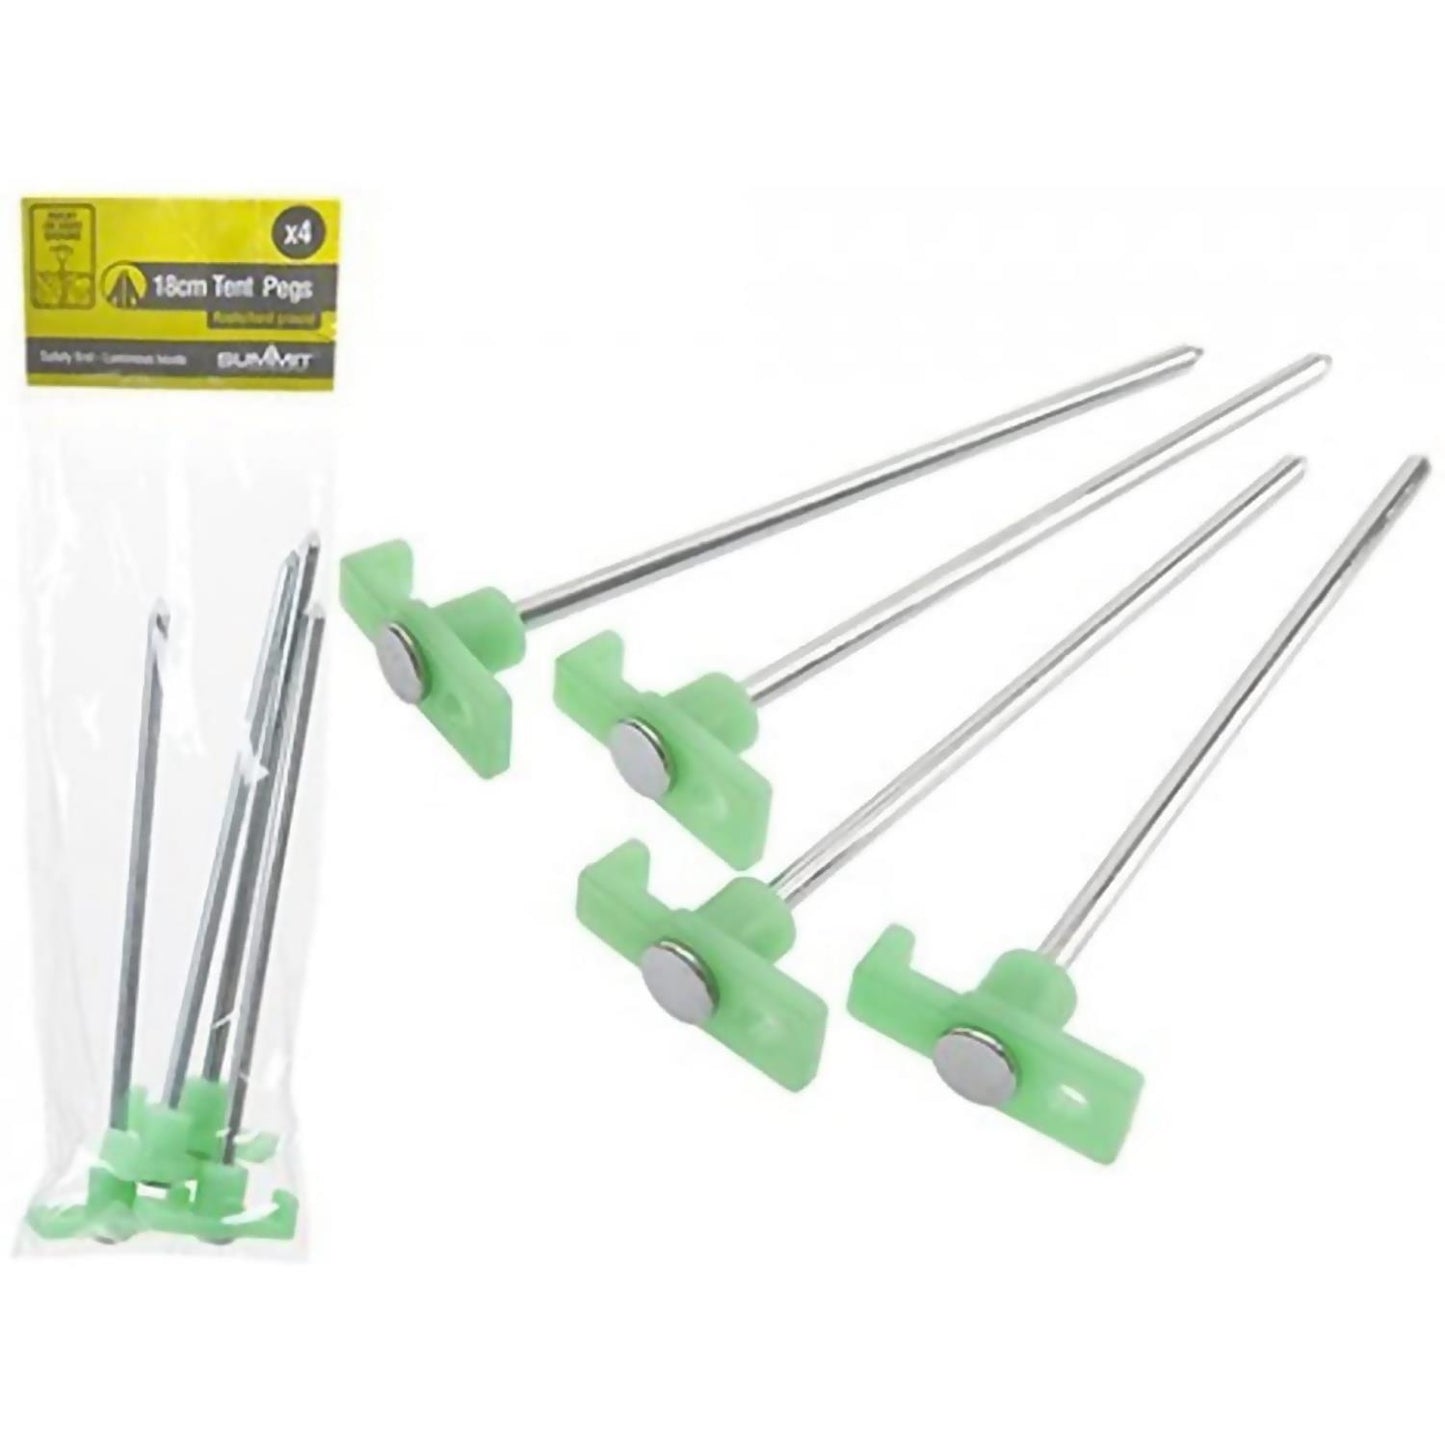 Glow-In-The-Dark Ground Rock 7-Inch Pegs For Tents